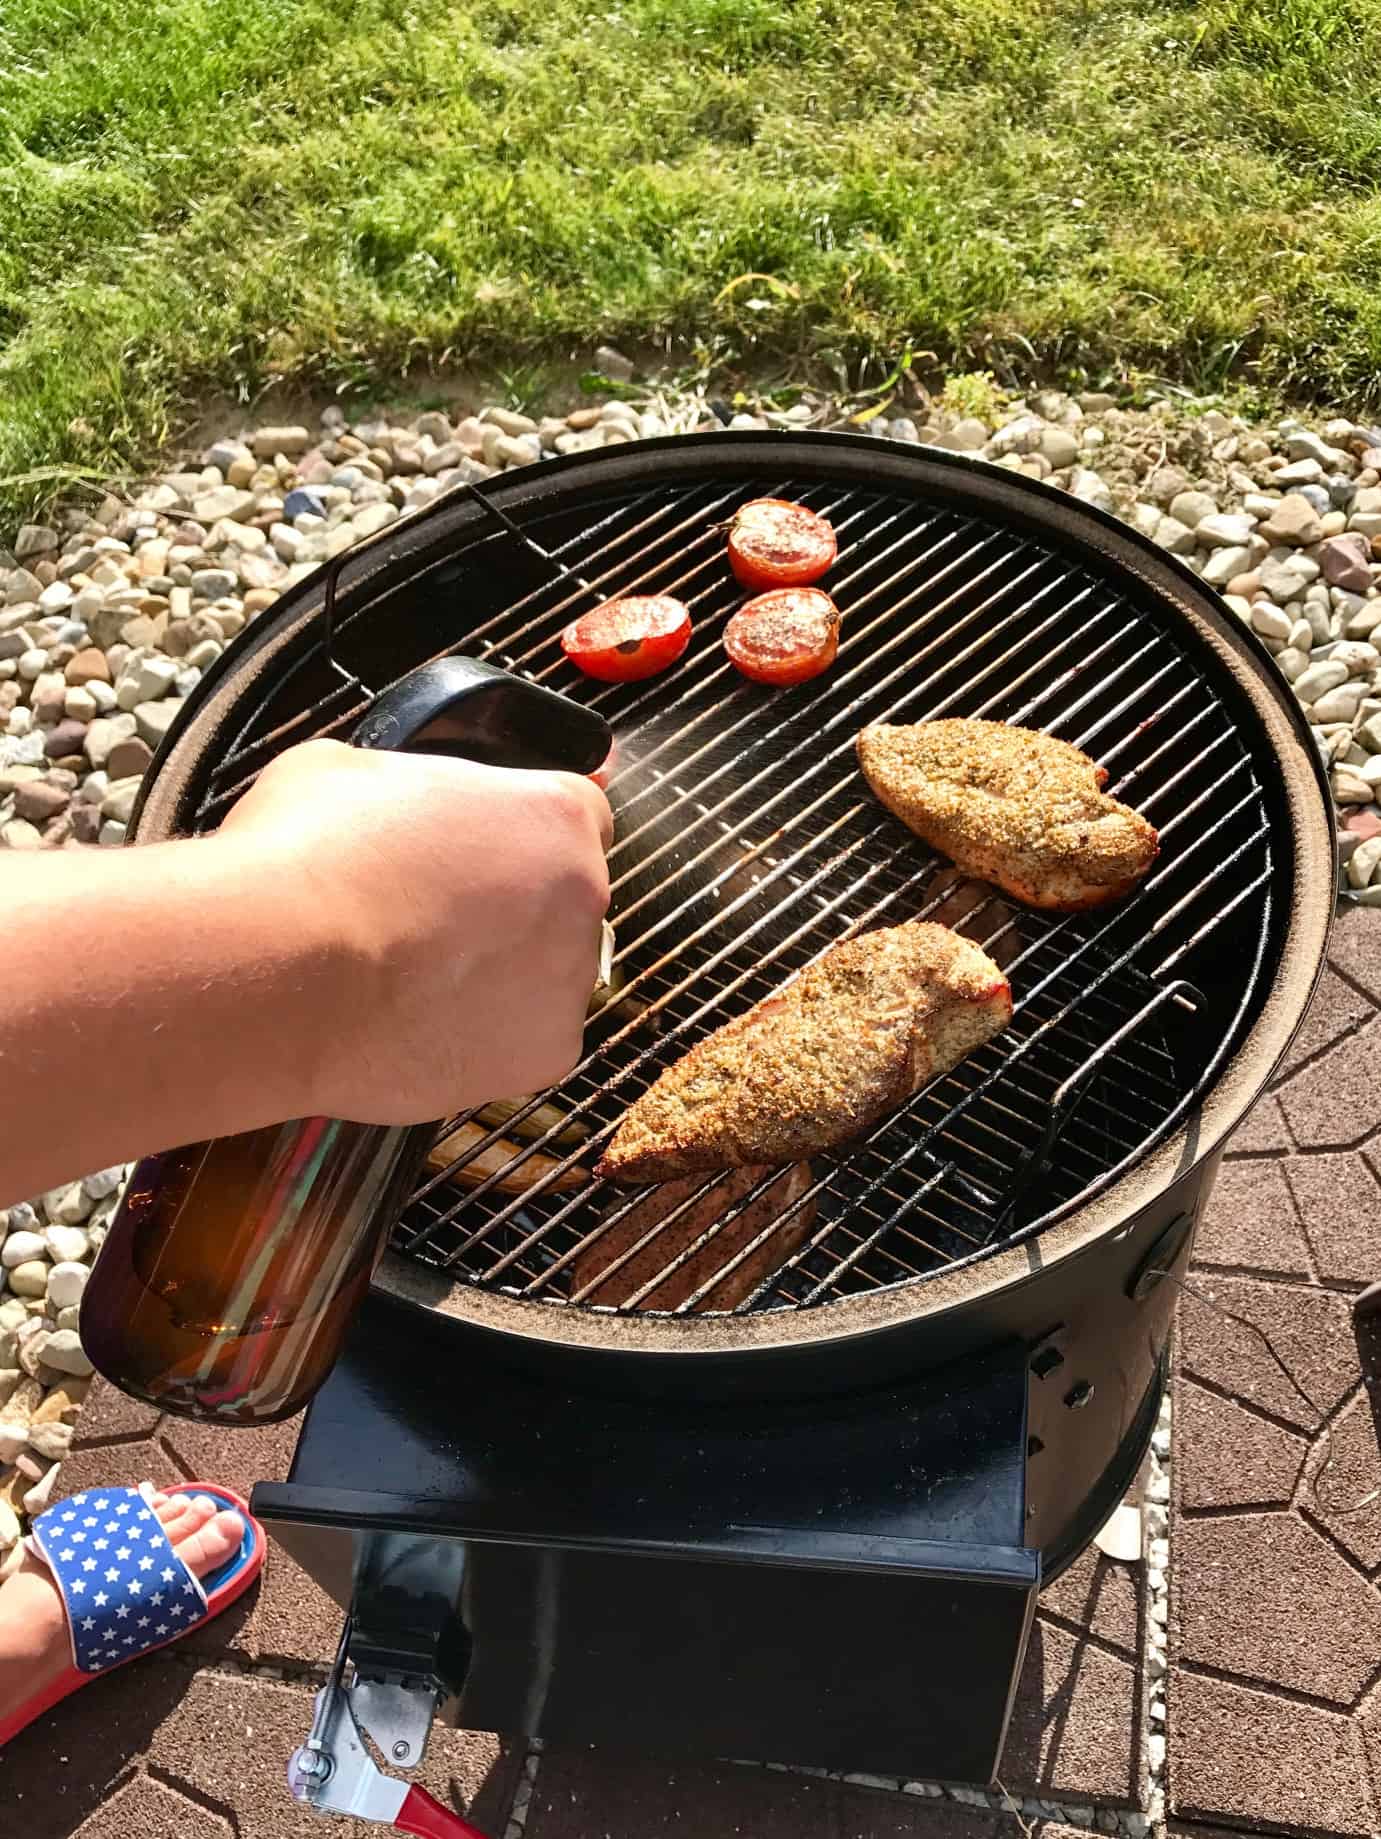 Spritzing chicken breasts on weber grill with water bottle 